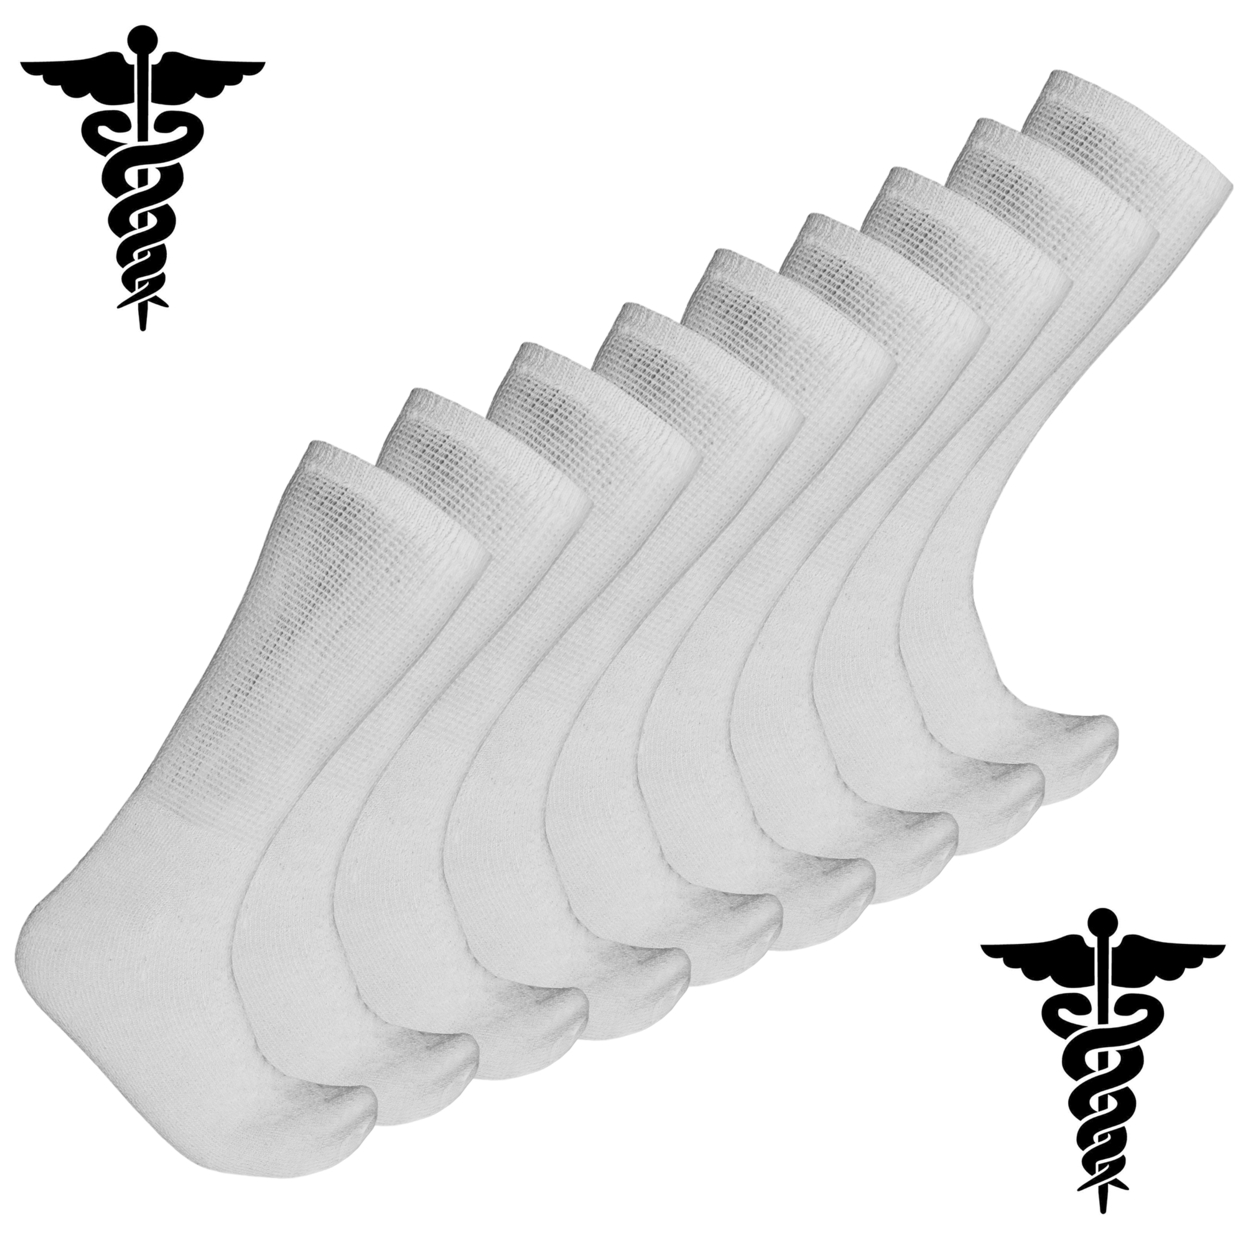 6-Pairs: Physician Approved Therapeutic Diabetic Socks - White, Men's